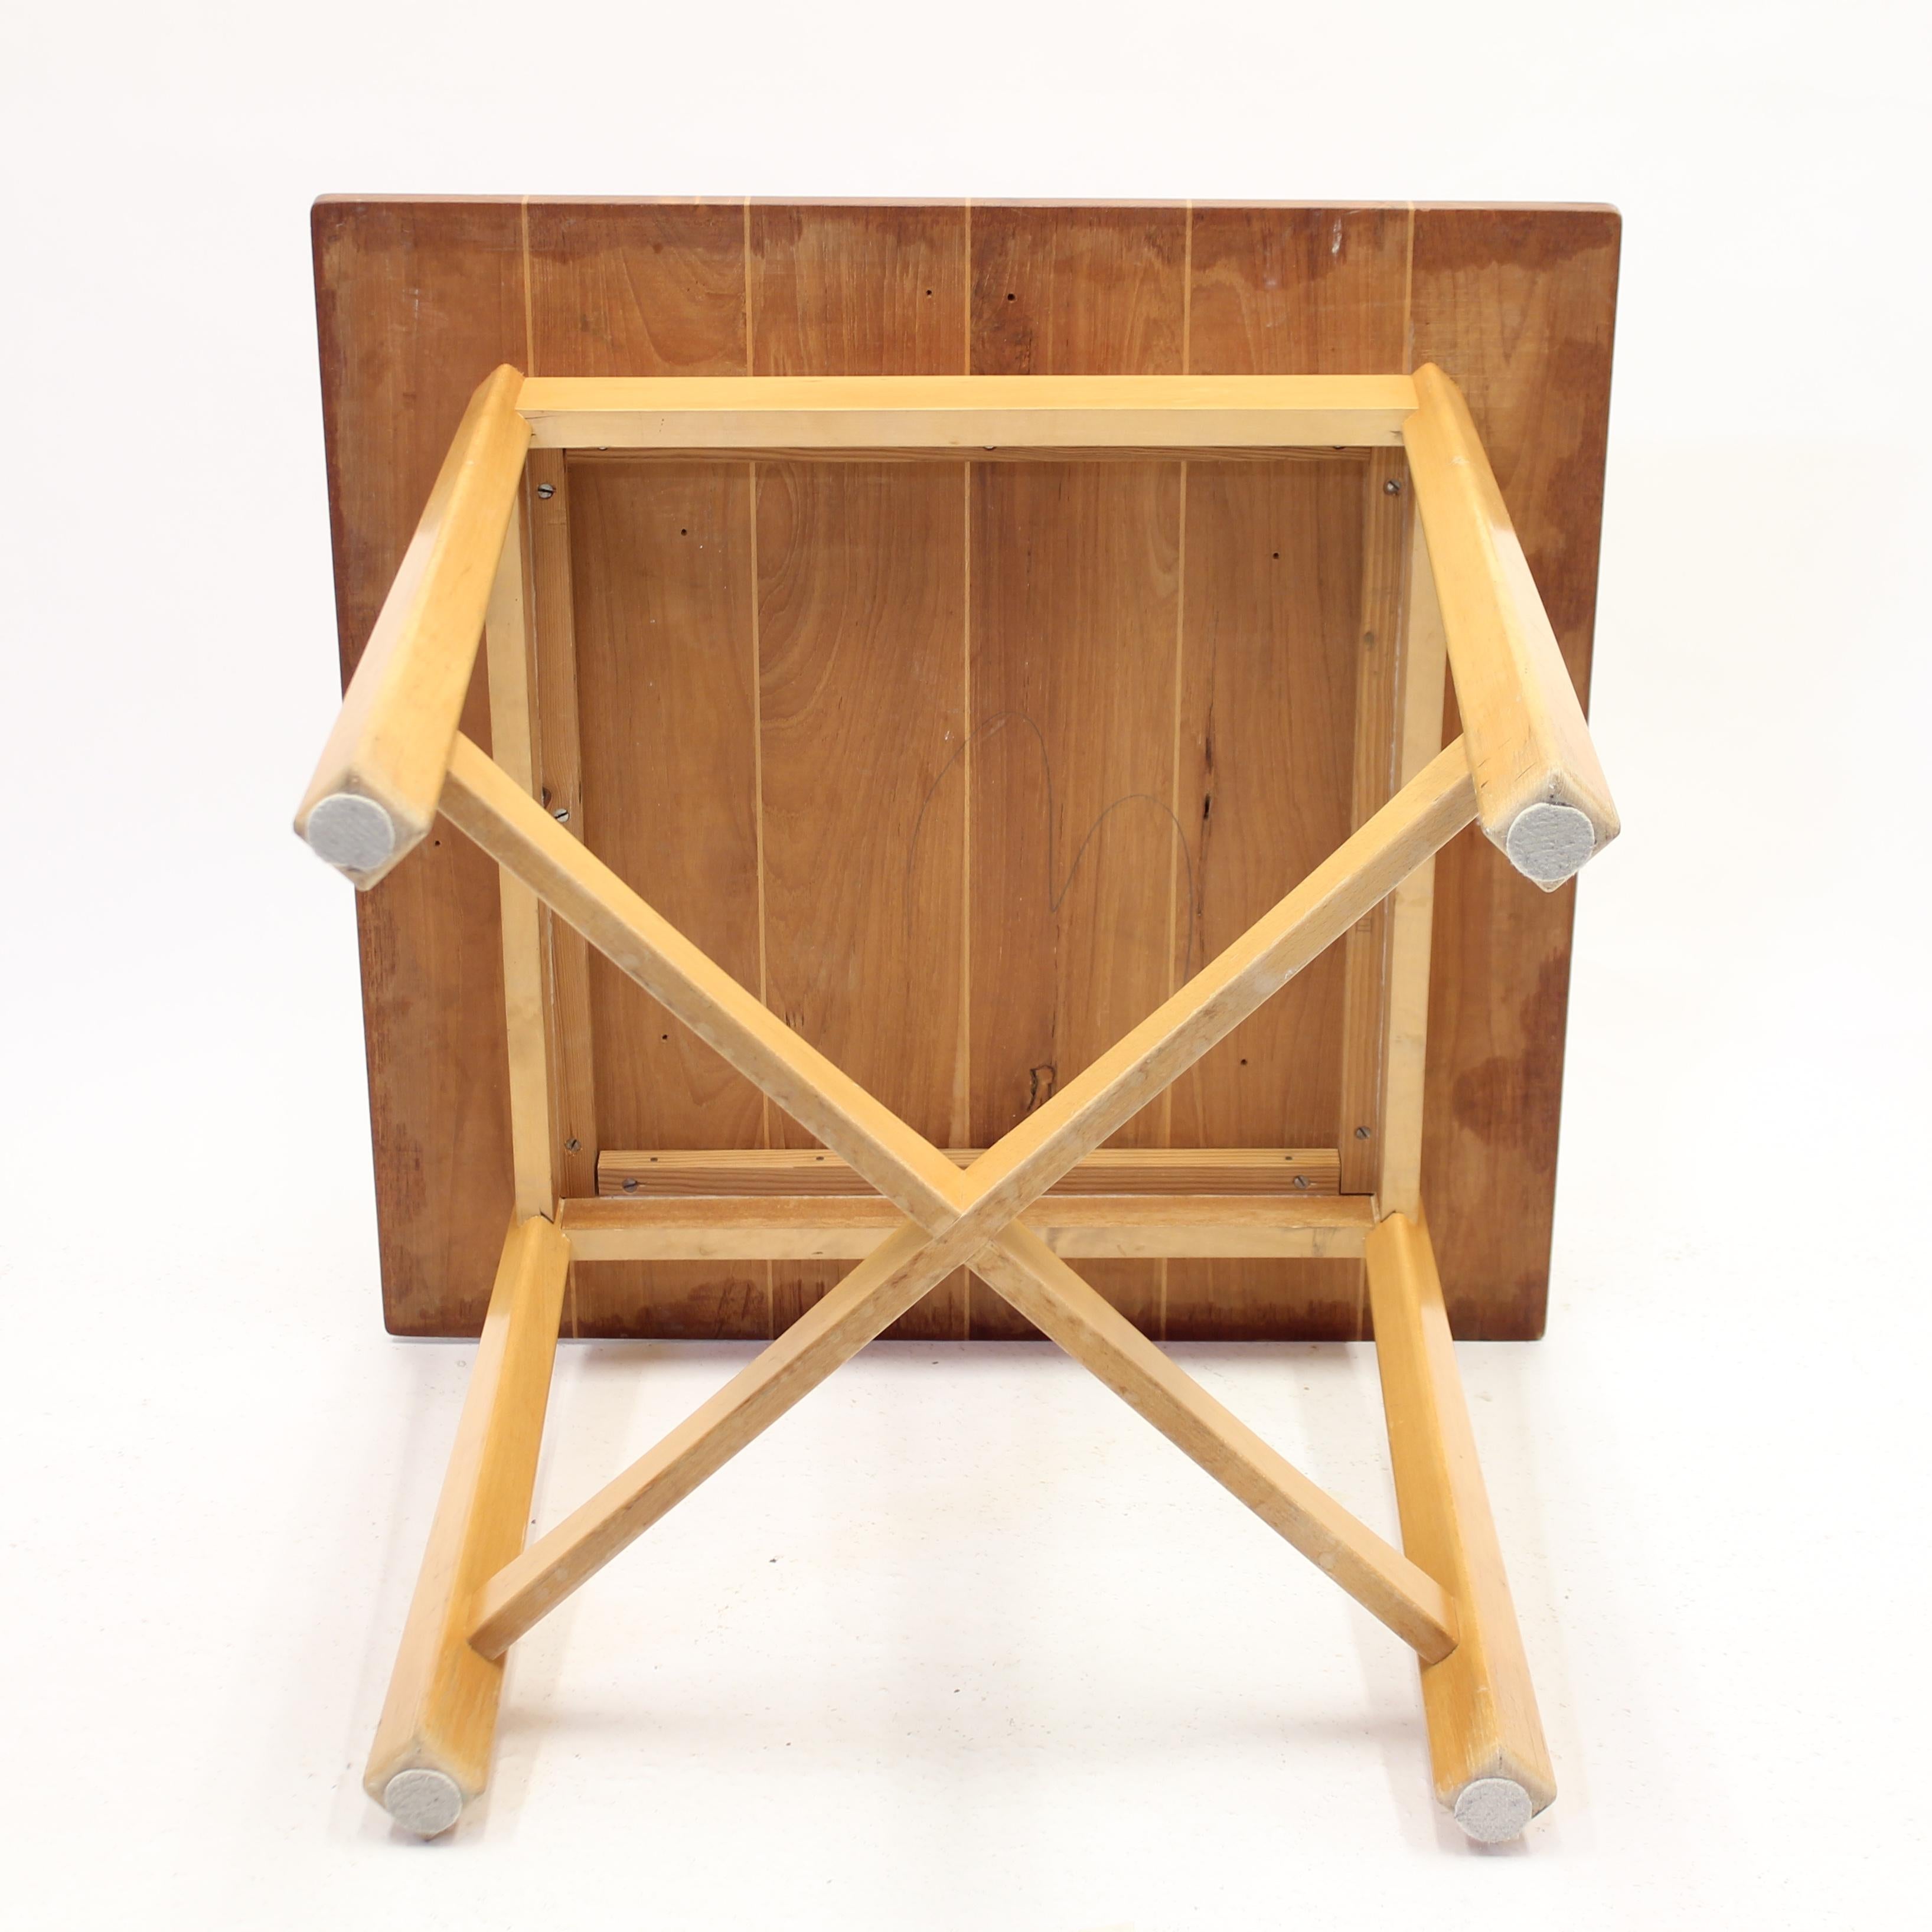 Swedish Modern Teak and Birch Table, Mid-20th Century For Sale 8